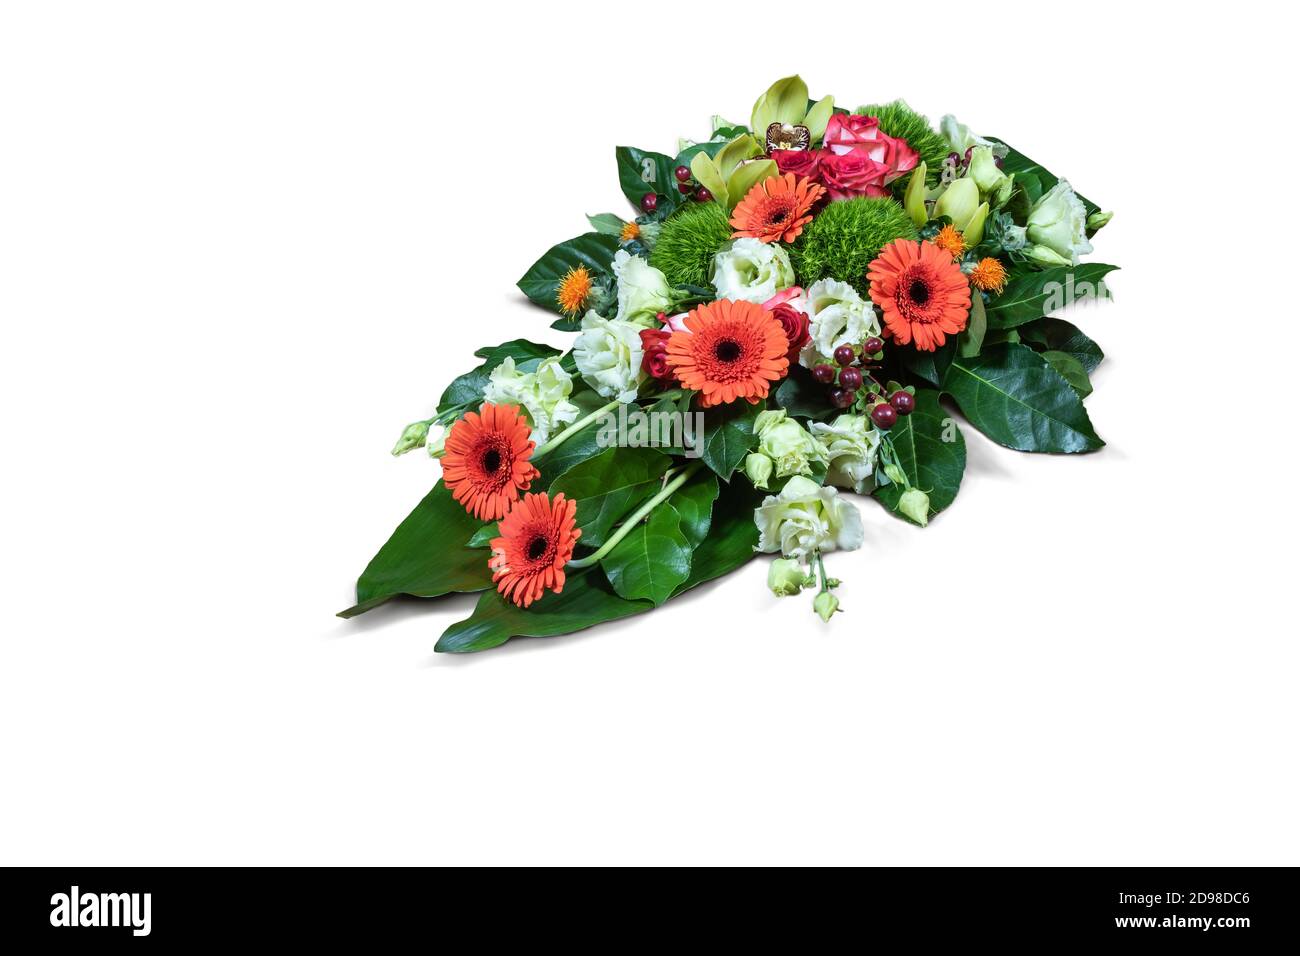 Colorful flower arrangement isolated on white background. Stock Photo